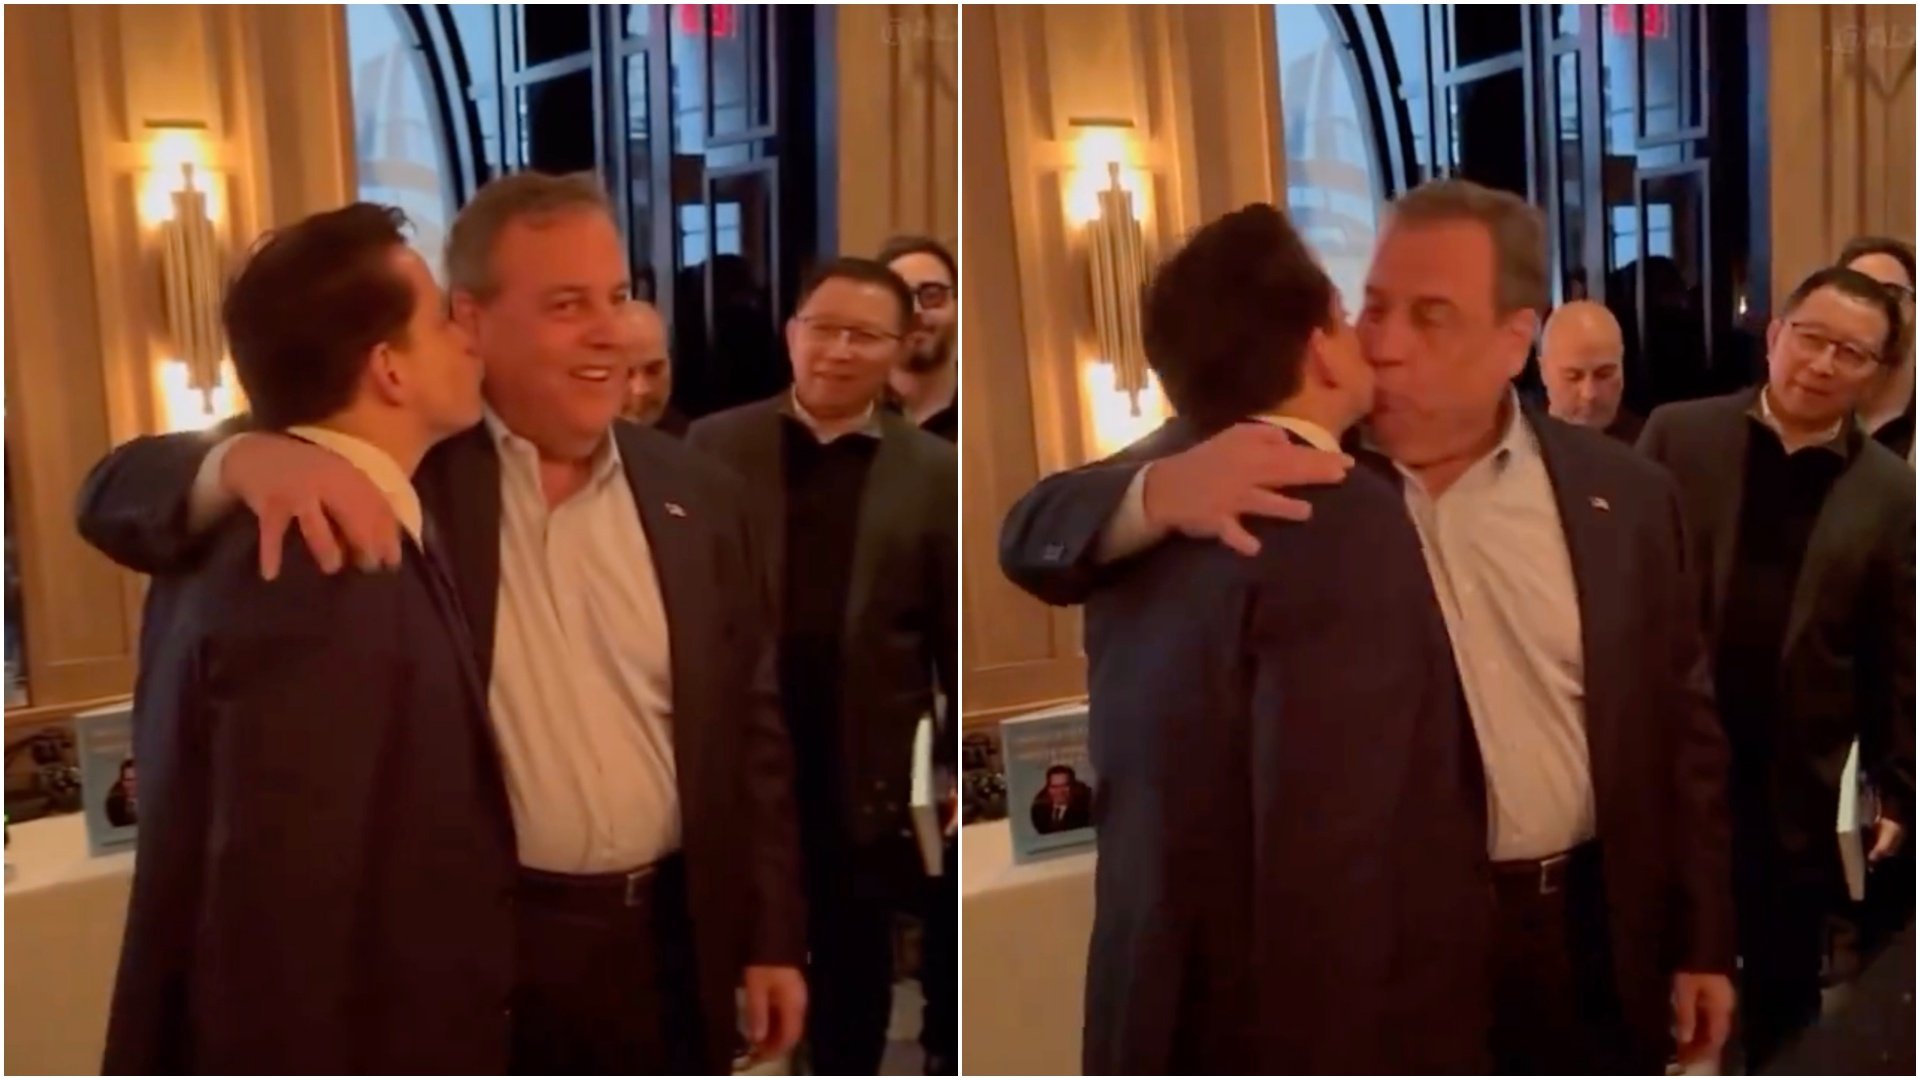 Trump hater Chris Christie turns cheek kiss into hug with Anthony Scaramucci in viral video |  The Gateway expert